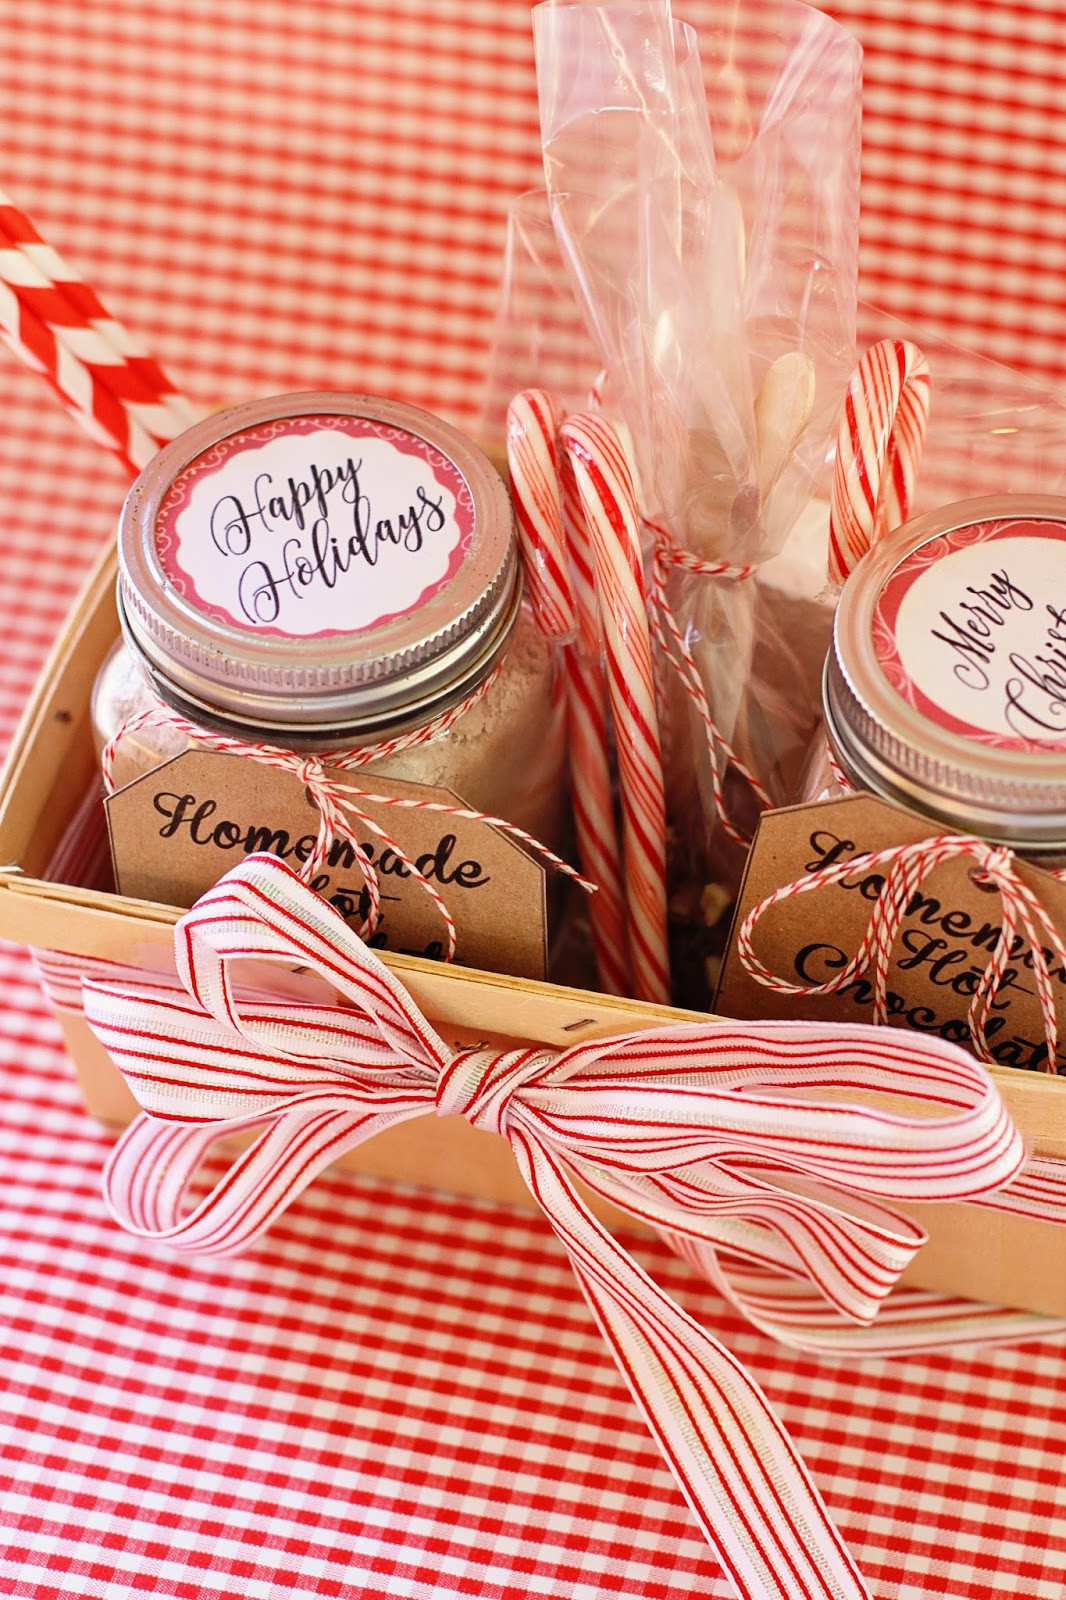 Hot Chocolate Gift Basket Ideas
 Running from the Law DIY Homemade Hot Chocolate Gift Basket